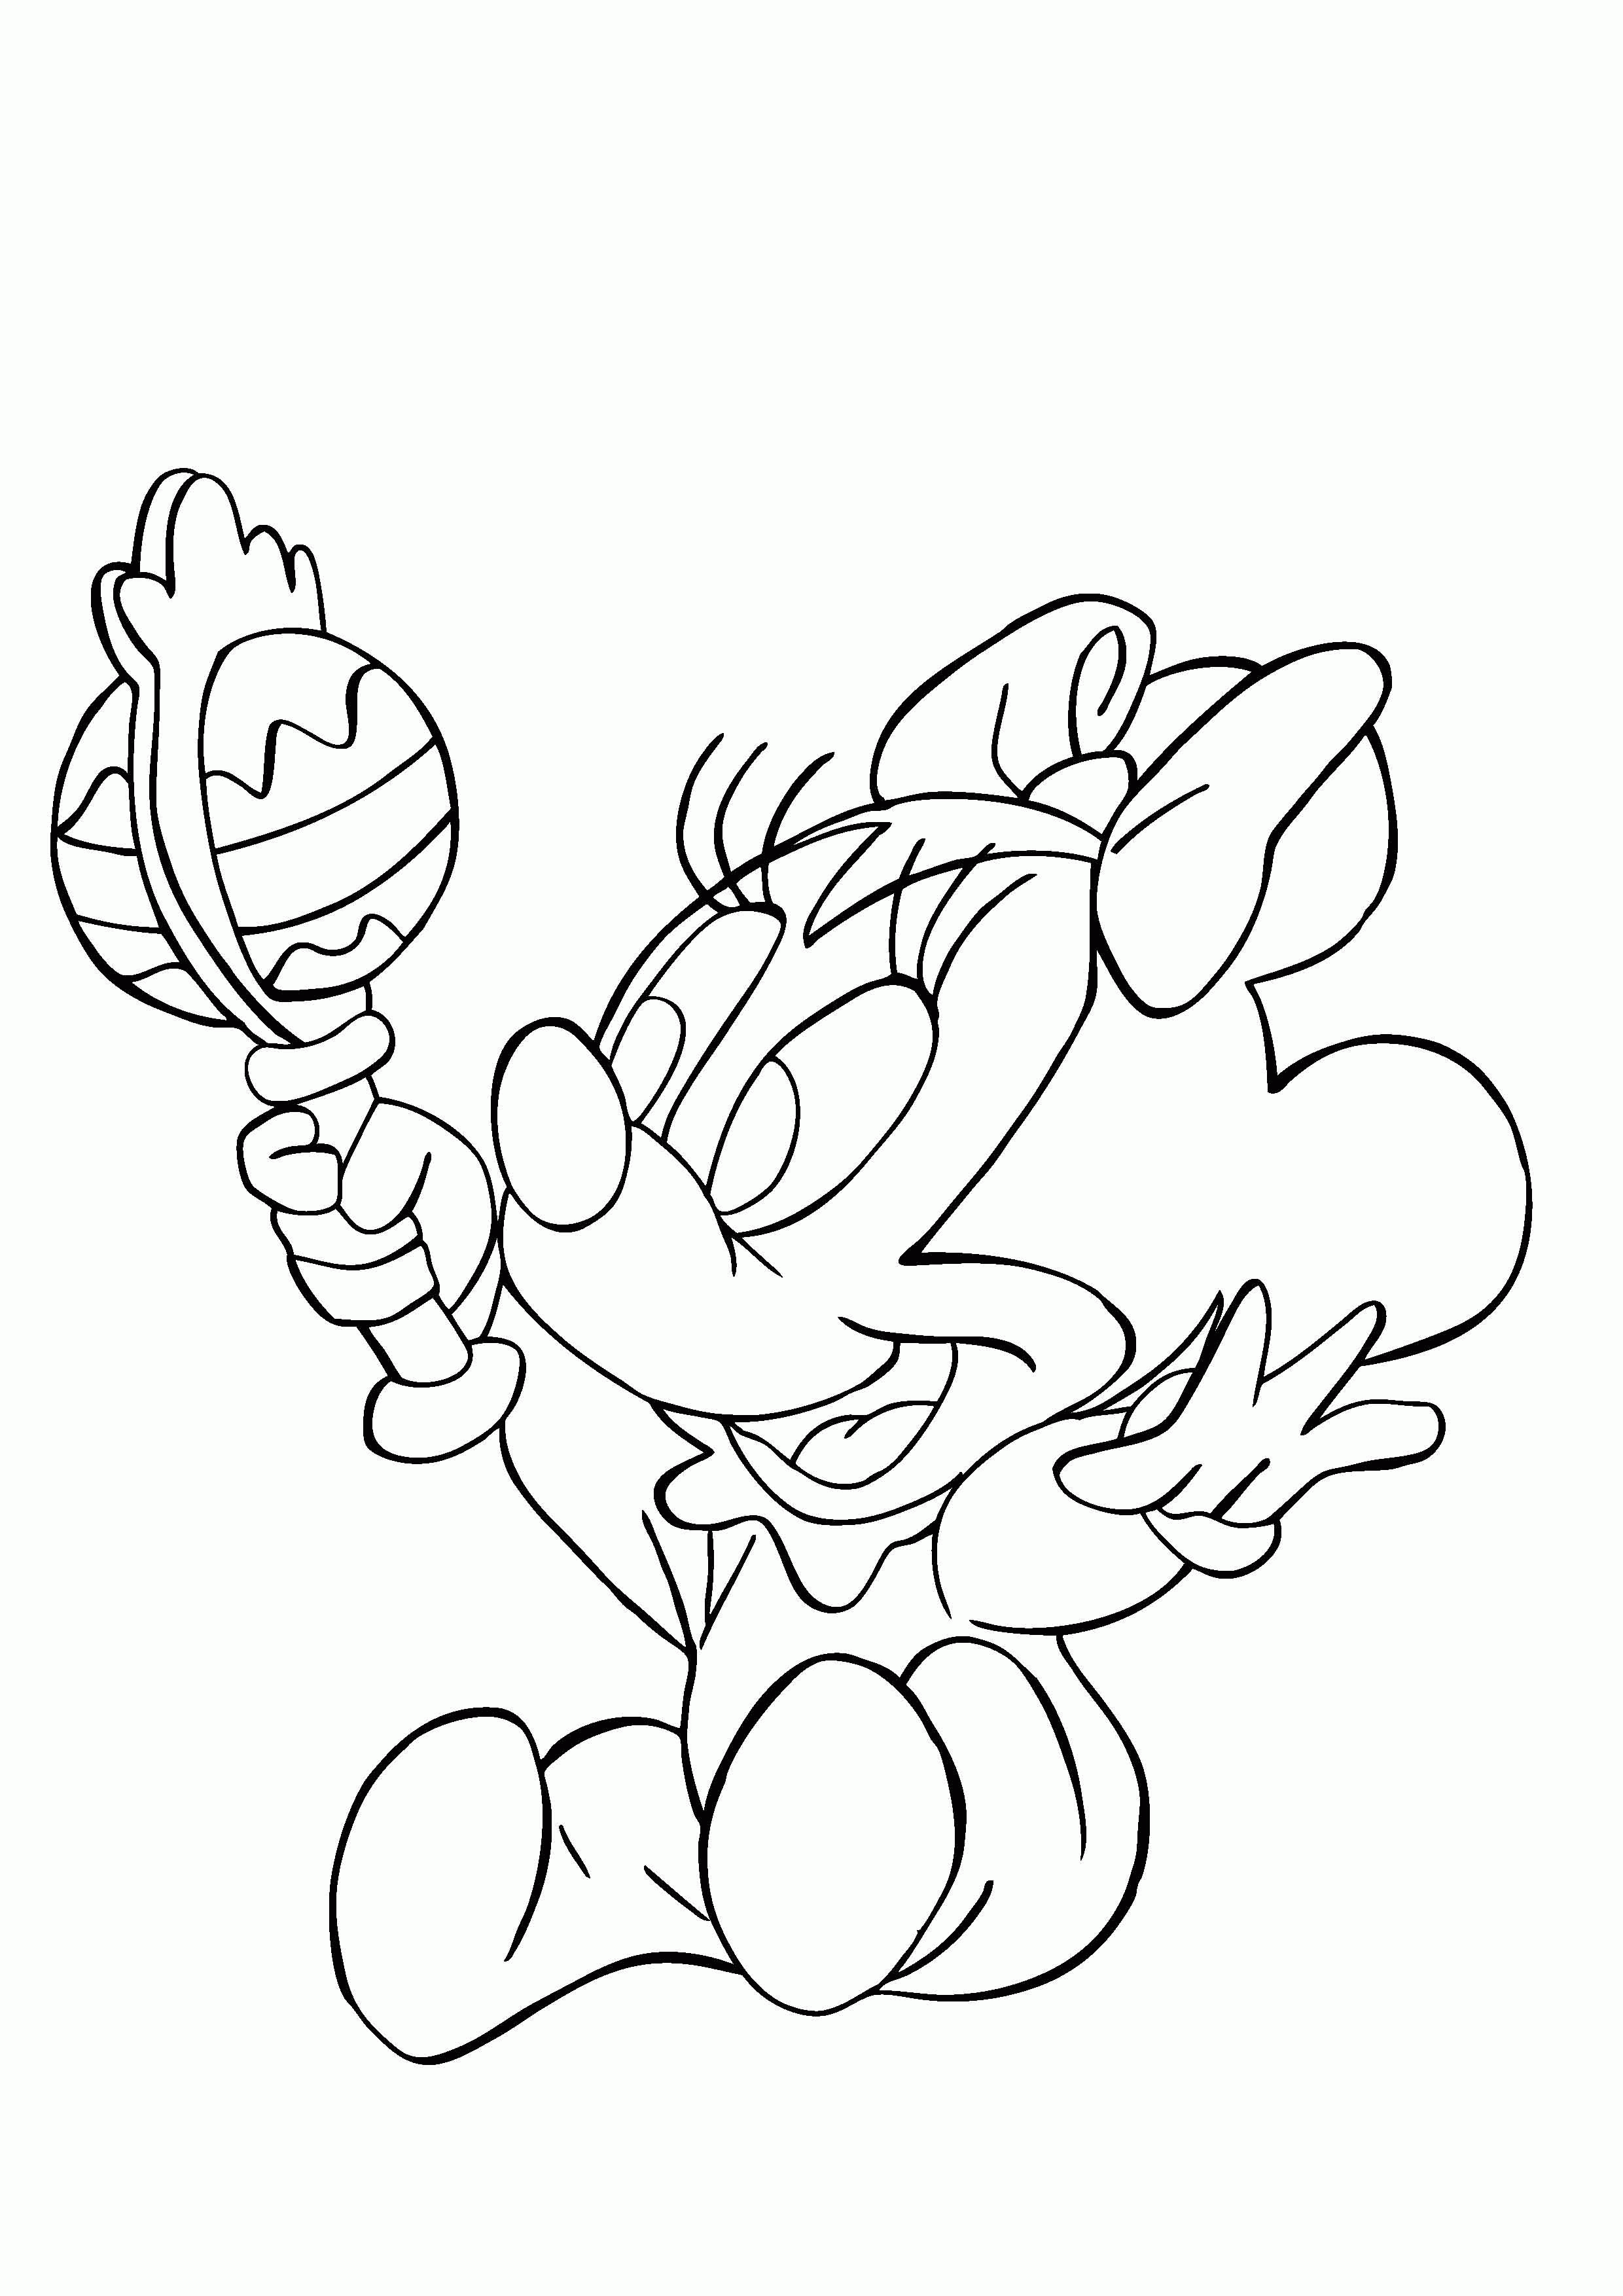 free-baby-minnie-mouse-coloring-pages-download-free-baby-minnie-mouse